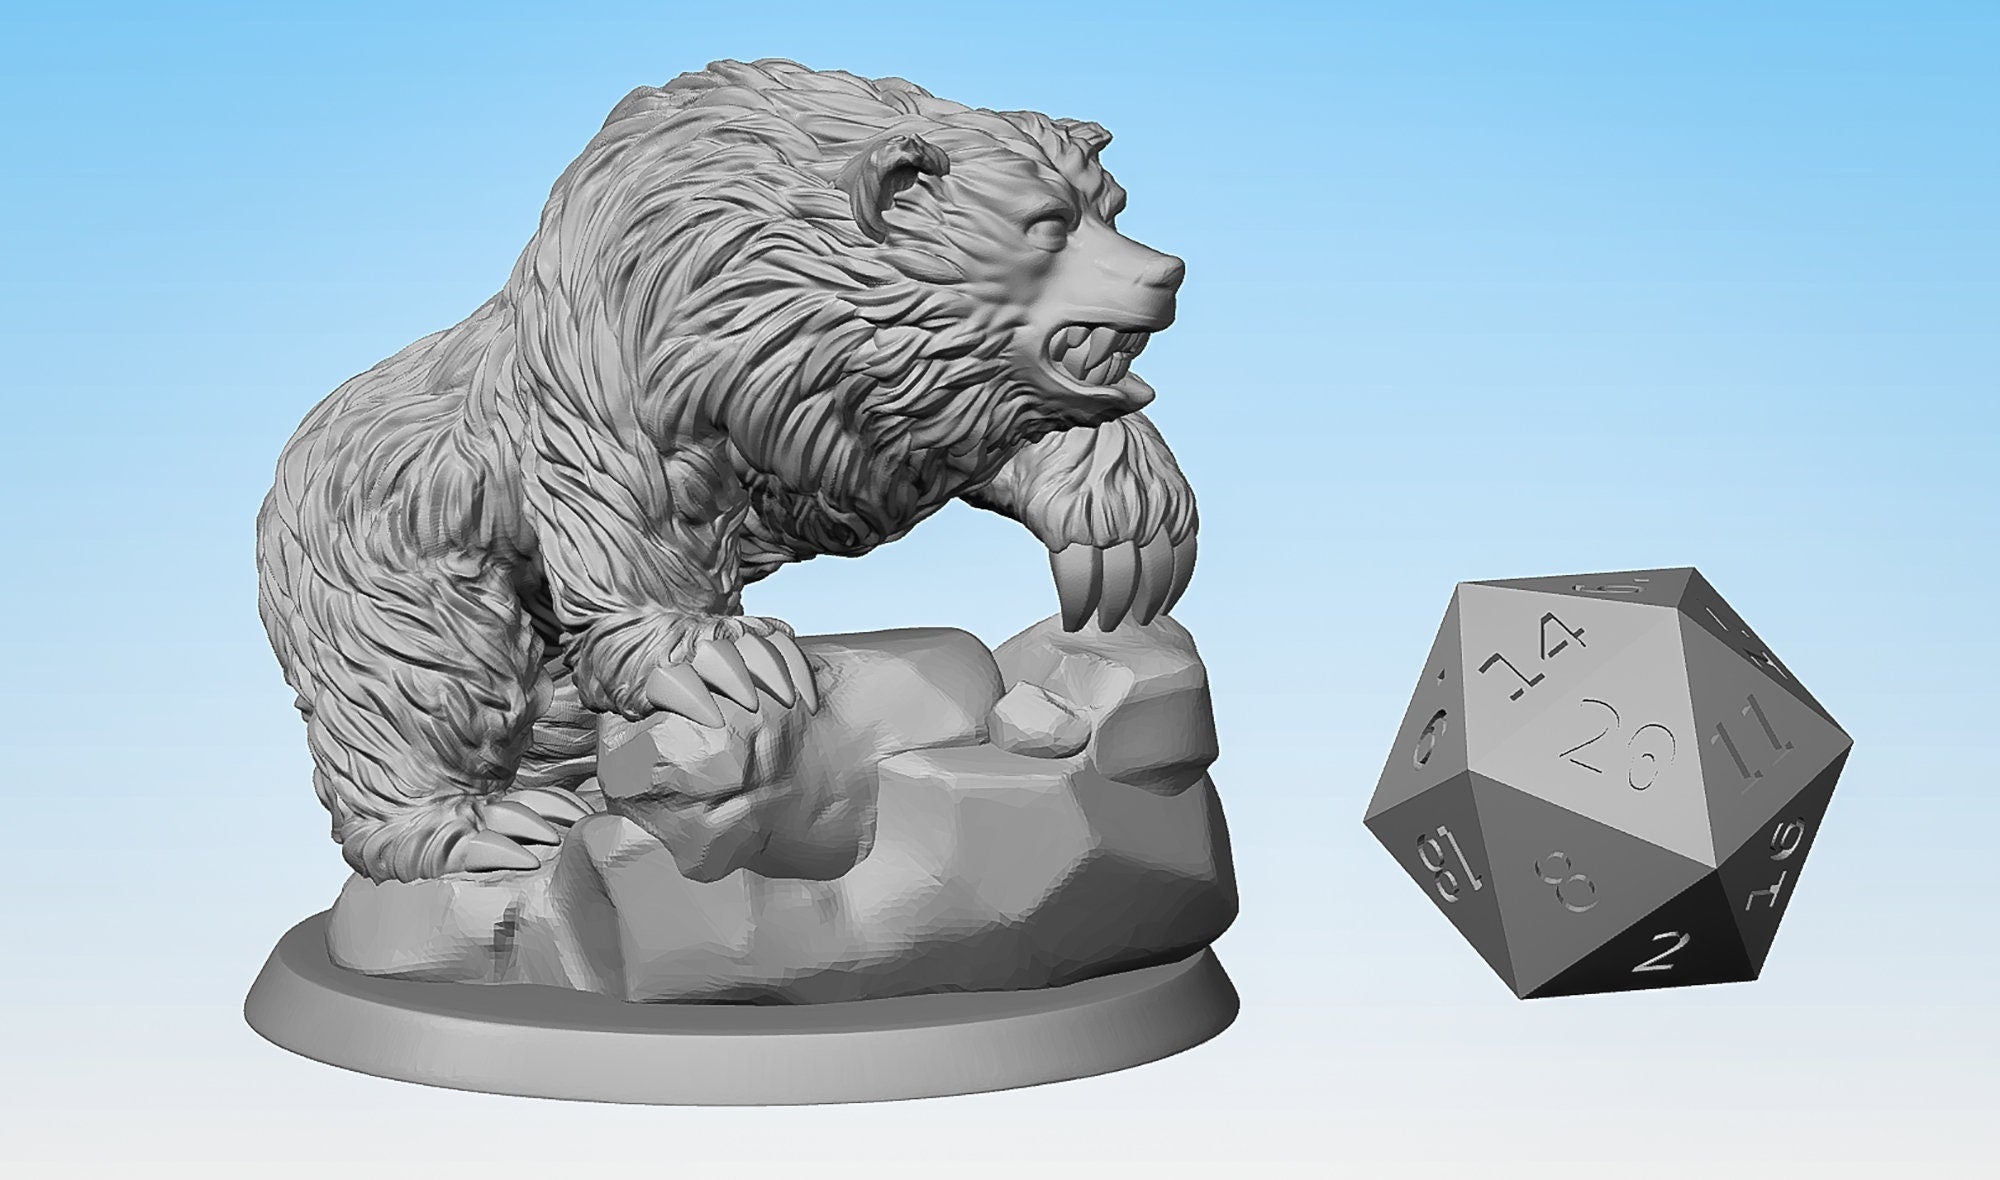 BEAR "Prowling" | Dungeons and Dragons | DnD | Pathfinder | Tabletop | RPAG | Hero Size | 28 mm-Role Playing Miniatures